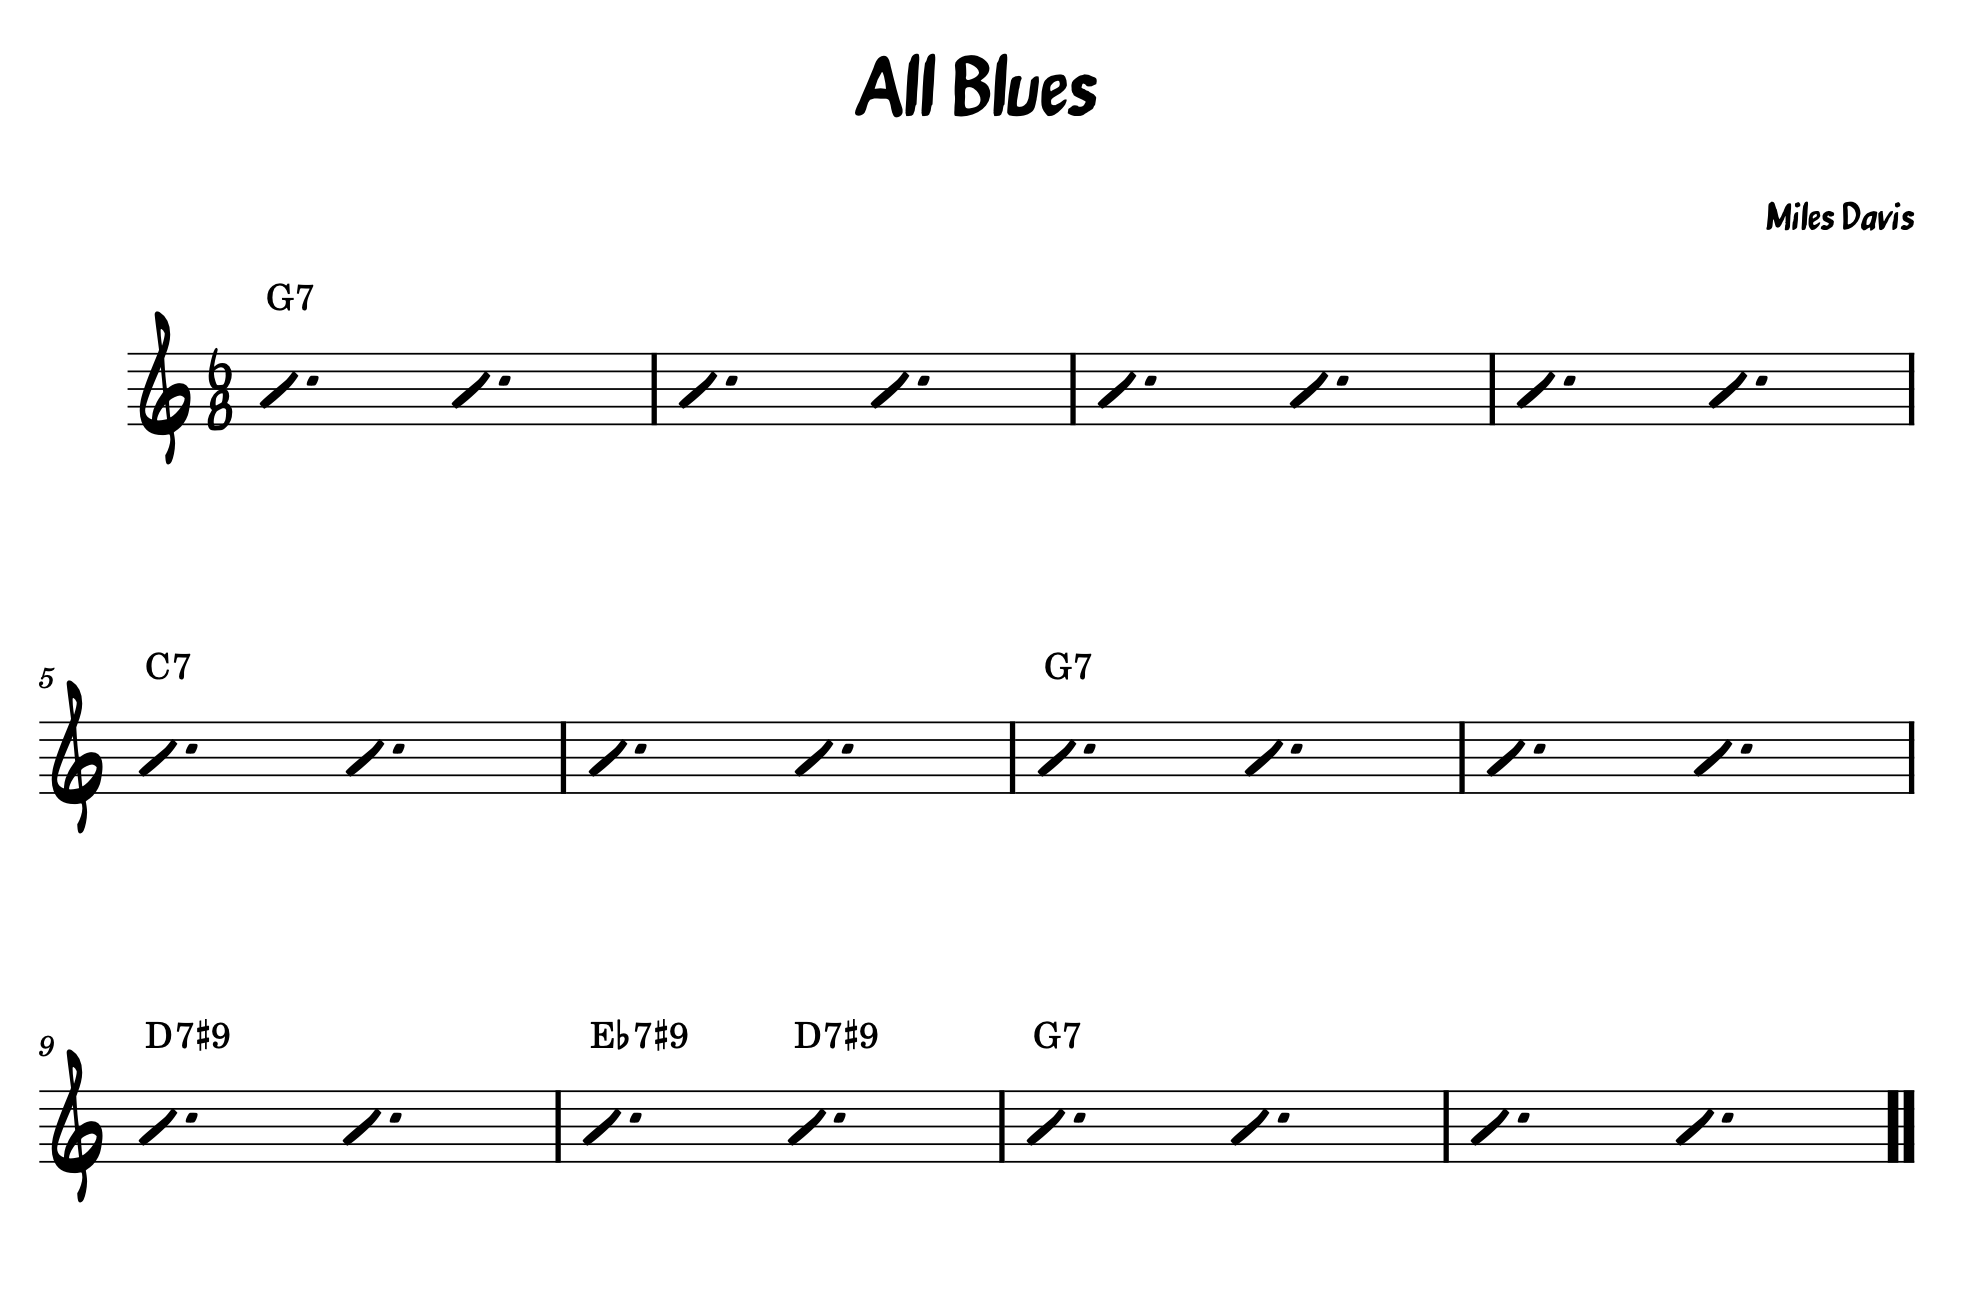 Blues chords: Lead Sheet For Miles Davis's All Blues